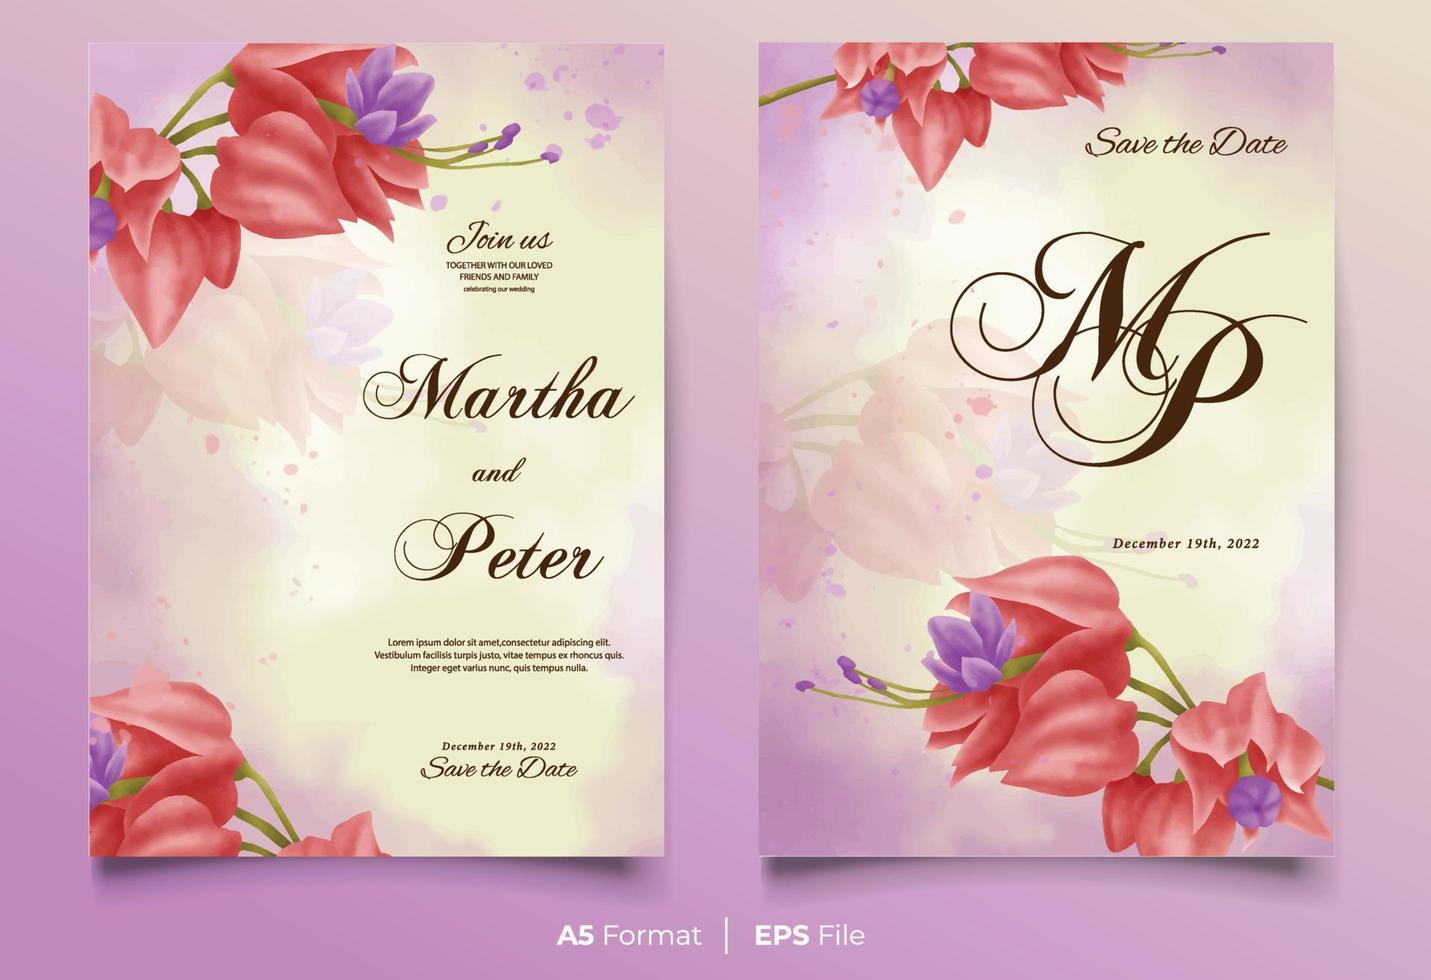 Watercolor wedding invitation template with pink flower ornament vector